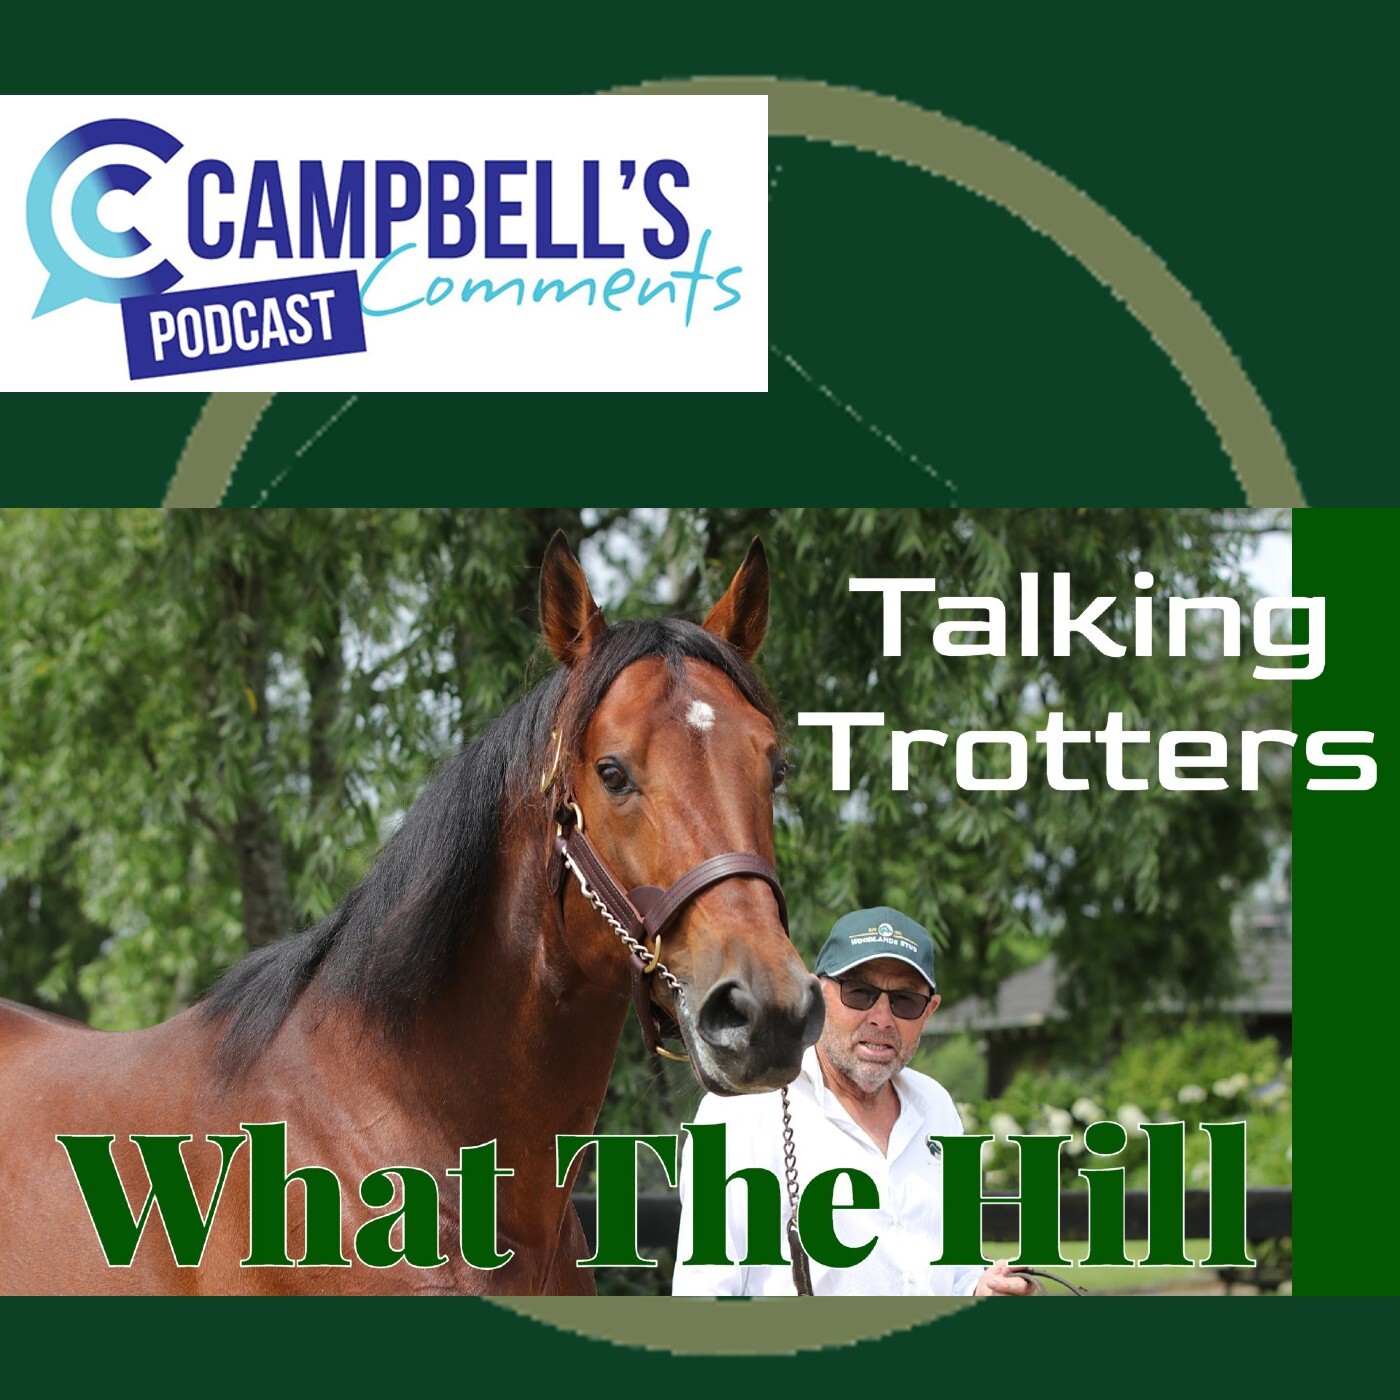 You are currently viewing 266: CC Talking Trotters for What The Hill